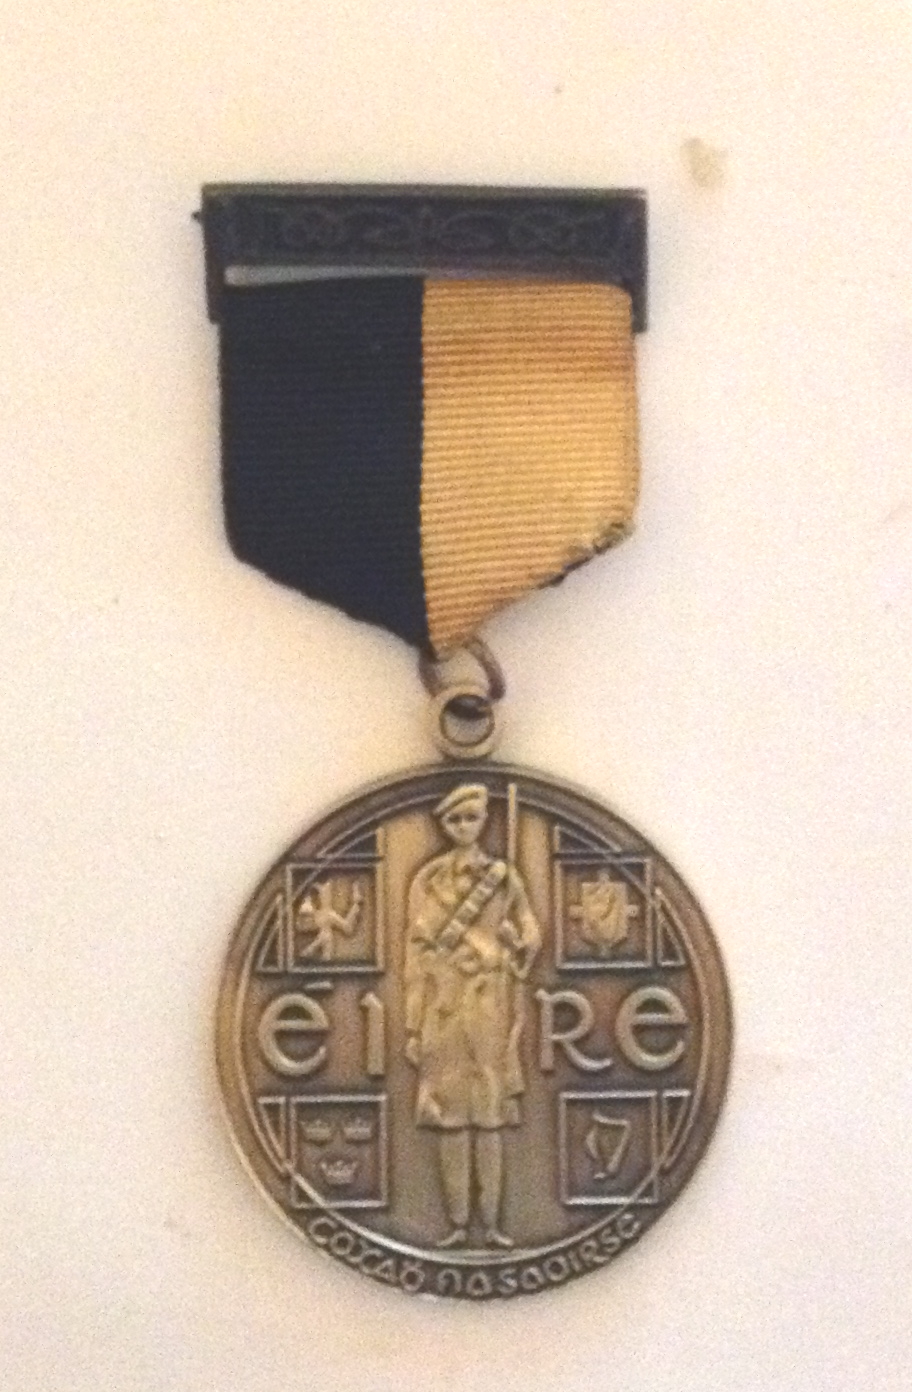 the medal